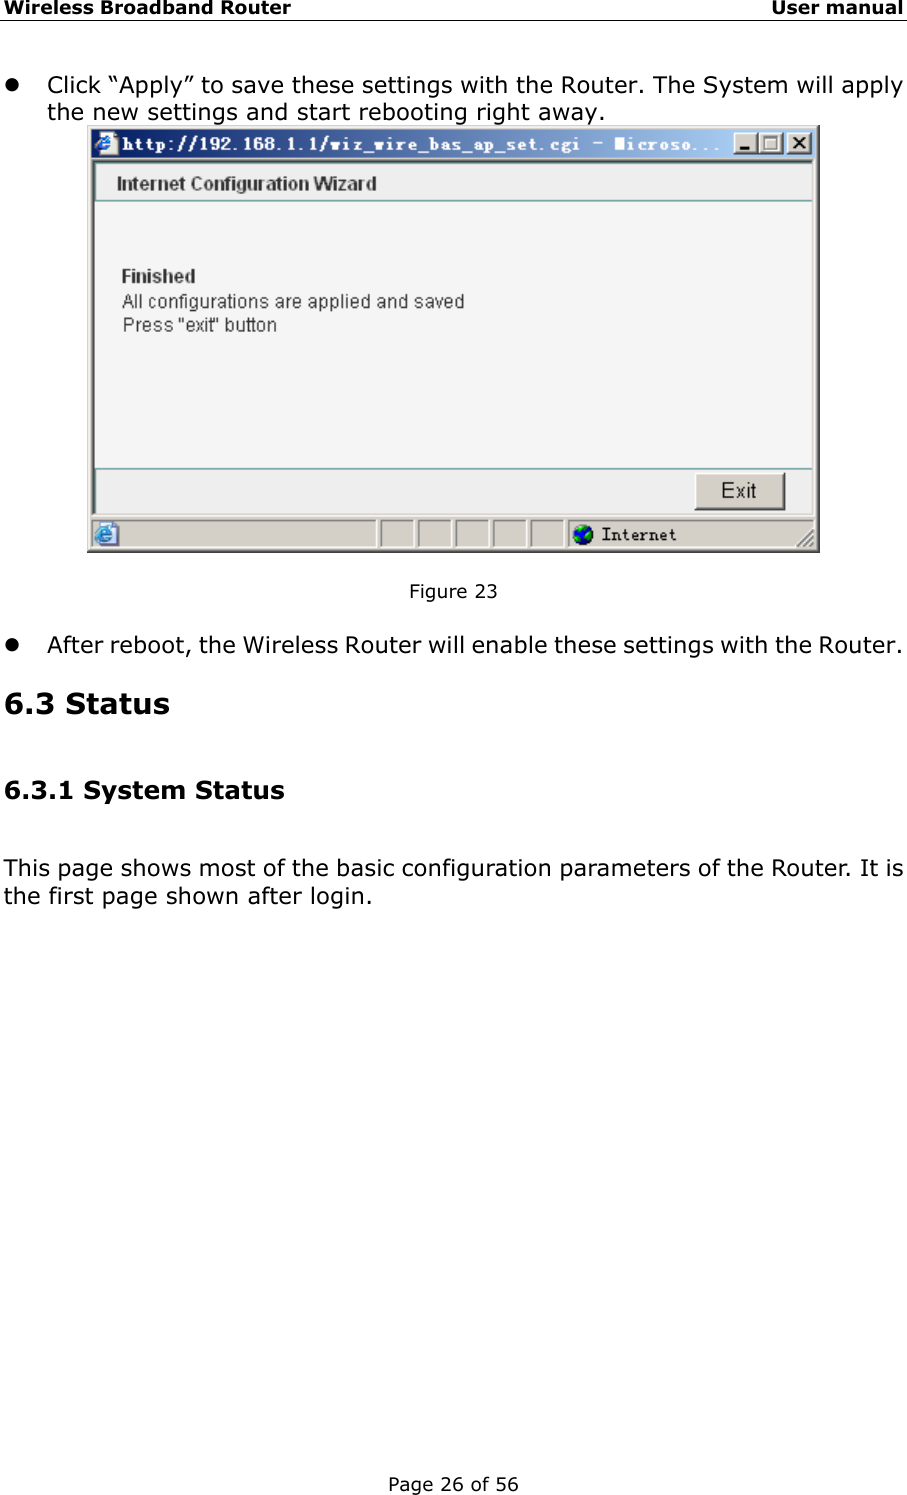 Wireless Broadband Router                                                   User manual Page 26 of 56 z Click “Apply” to save these settings with the Router. The System will apply the new settings and start rebooting right away.   Figure 23  z After reboot, the Wireless Router will enable these settings with the Router.   6.3 Status   6.3.1 System Status This page shows most of the basic configuration parameters of the Router. It is the first page shown after login.  